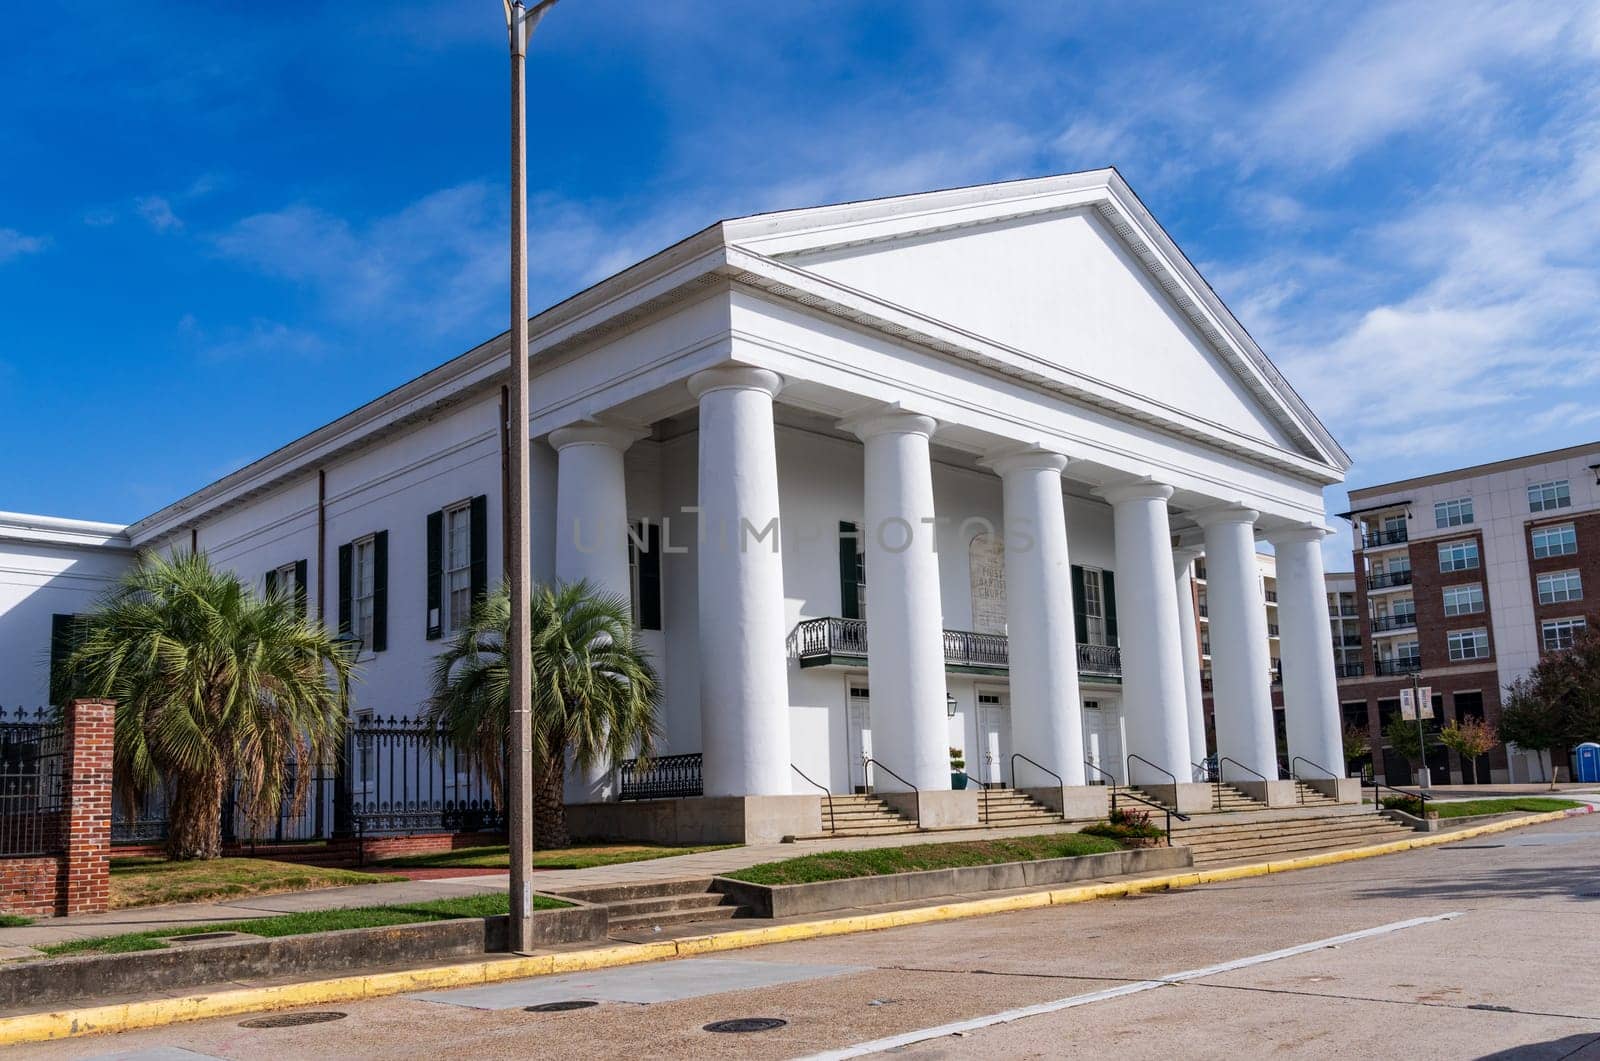 Greek revival style First Baptist Church in Baton Rouge Louisiana by steheap